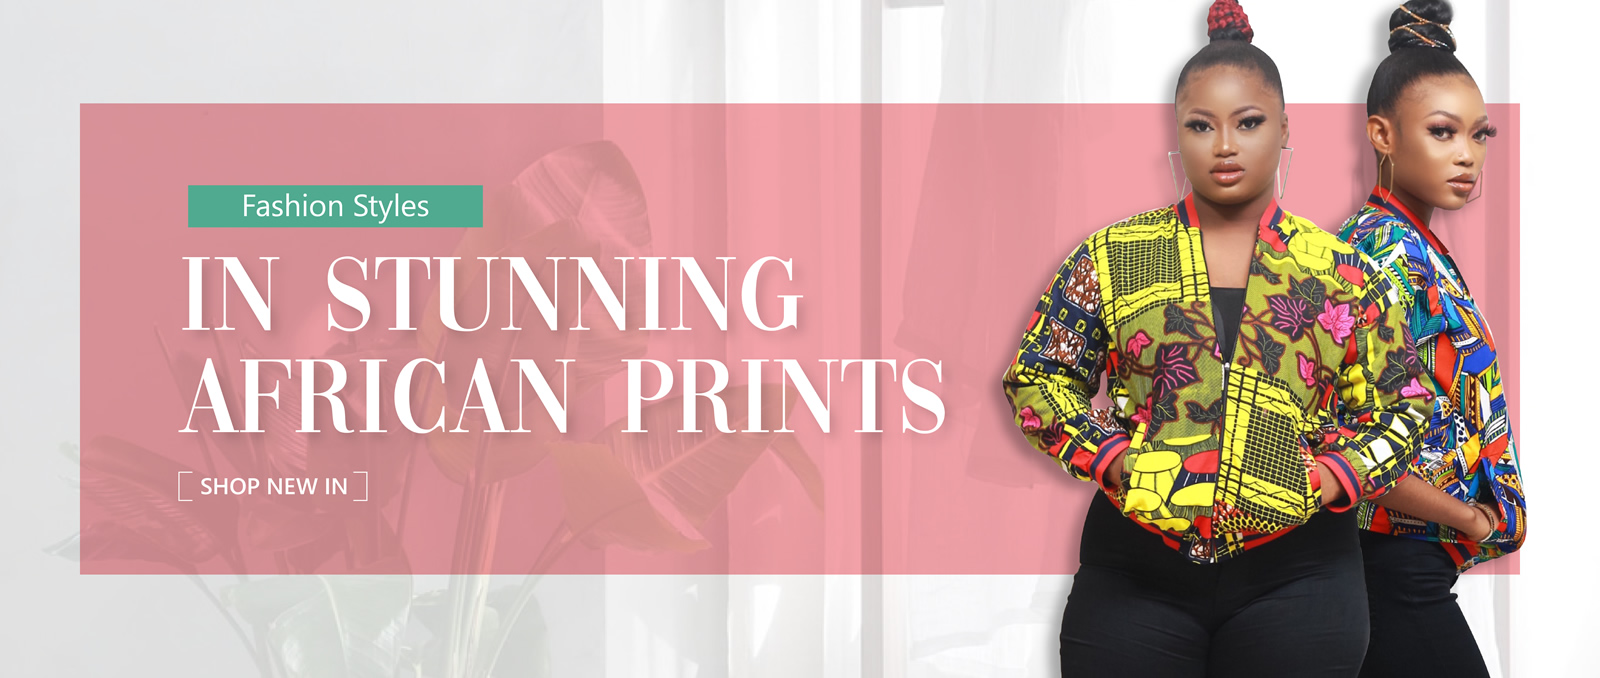 African prints